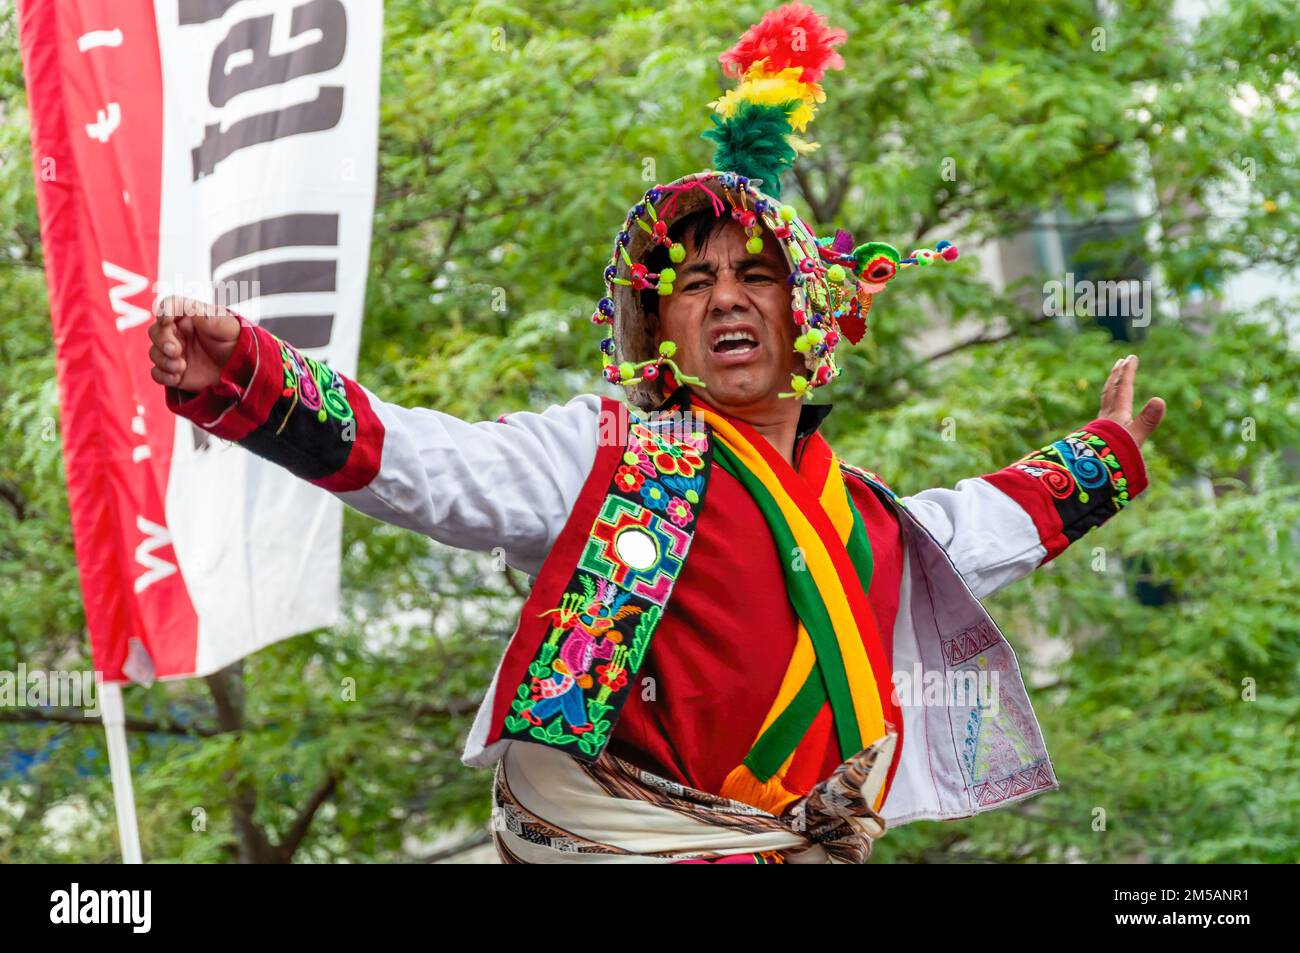 A member of the Grupo Llasas (Bolivia) dances in the stage wearing traditional clothes. The annual event is held in Mel Lastman square. Stock Photo